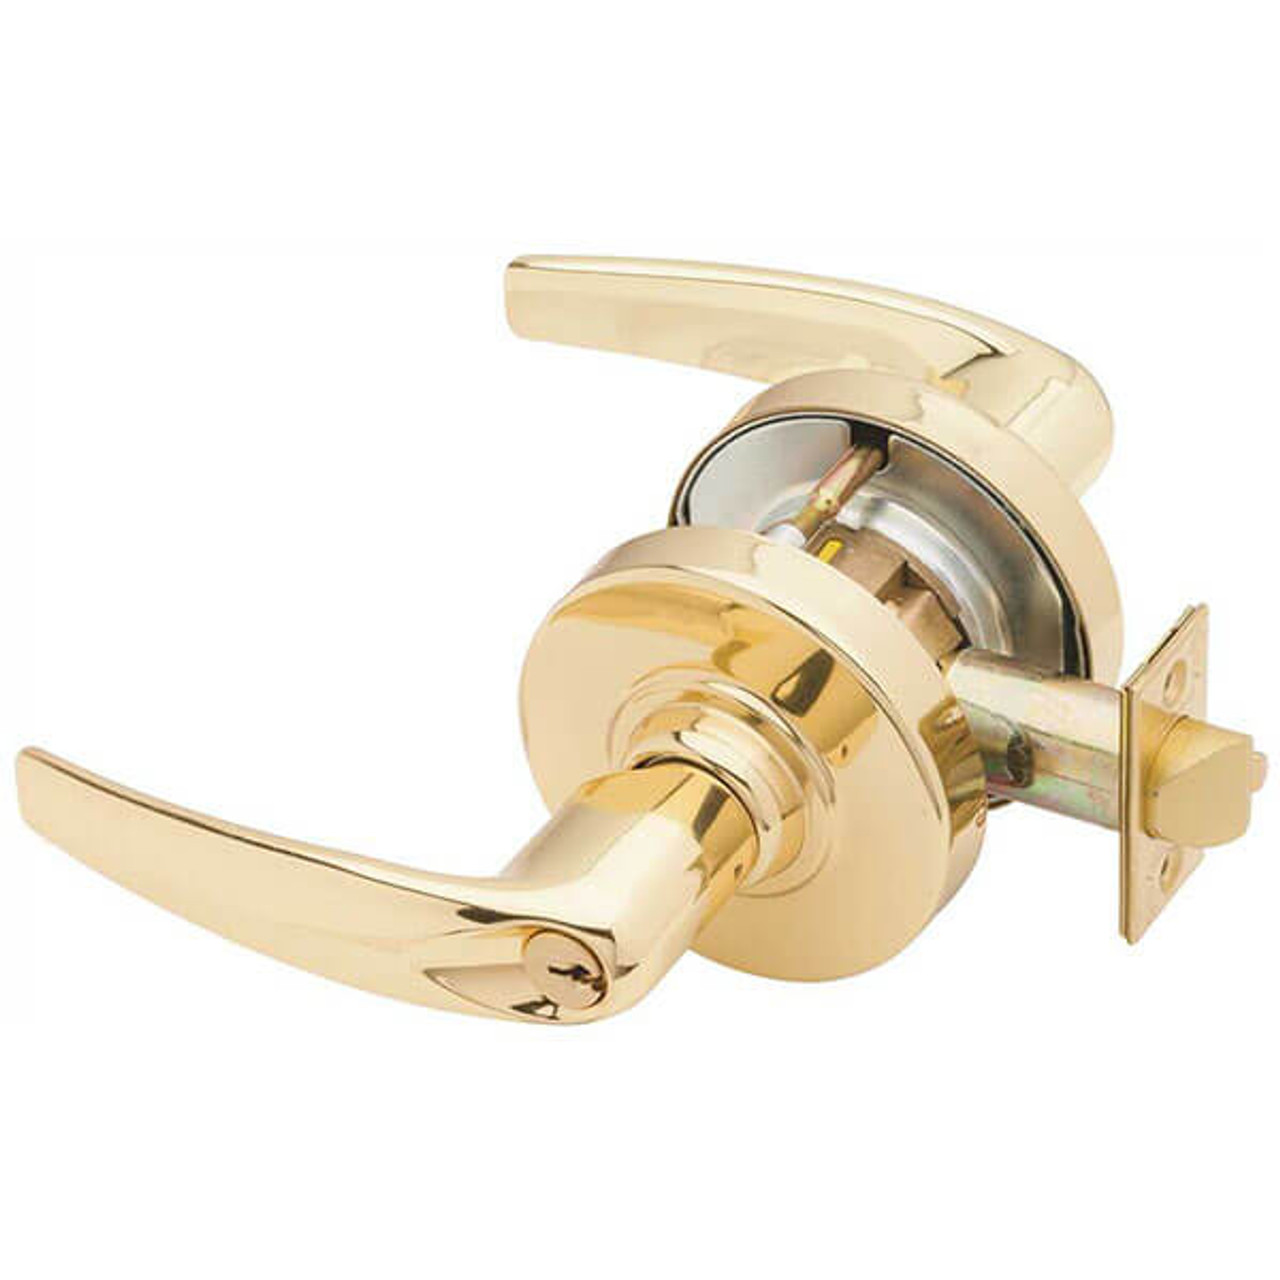 ALX80PD-ATH-605 Schlage Athens Cylindrical Lock in Bright Brass